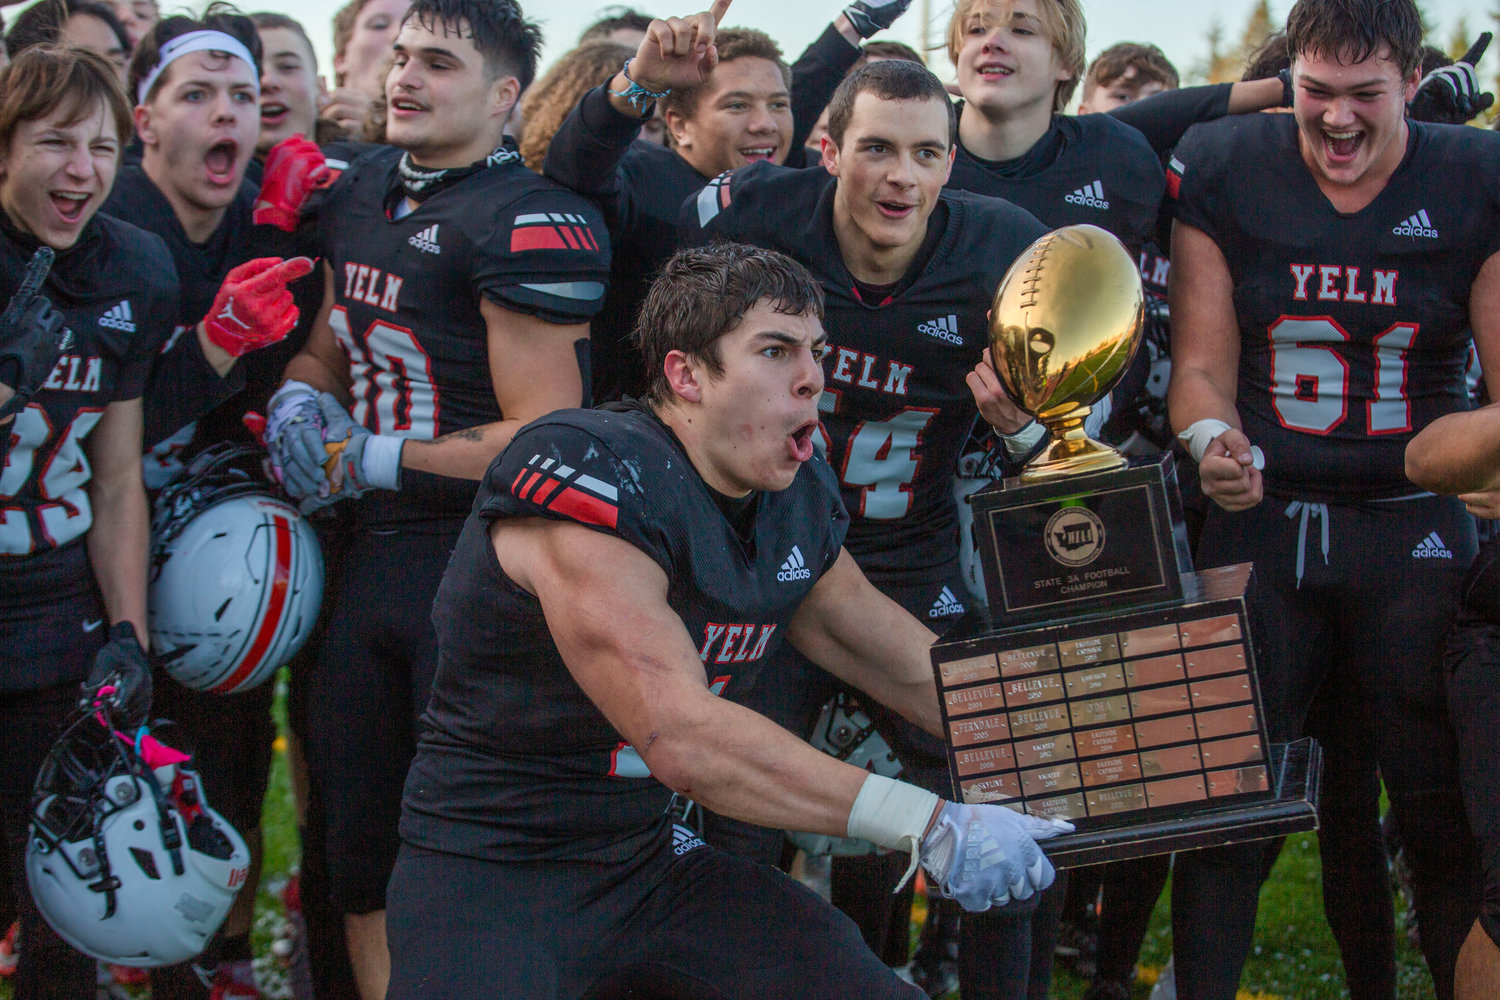 Running back Ray Wright holds up the trophy with other Yelm players after they won the 3A state championship game against Eastside Christian on Saturday in Puyallup on Dec. 3.